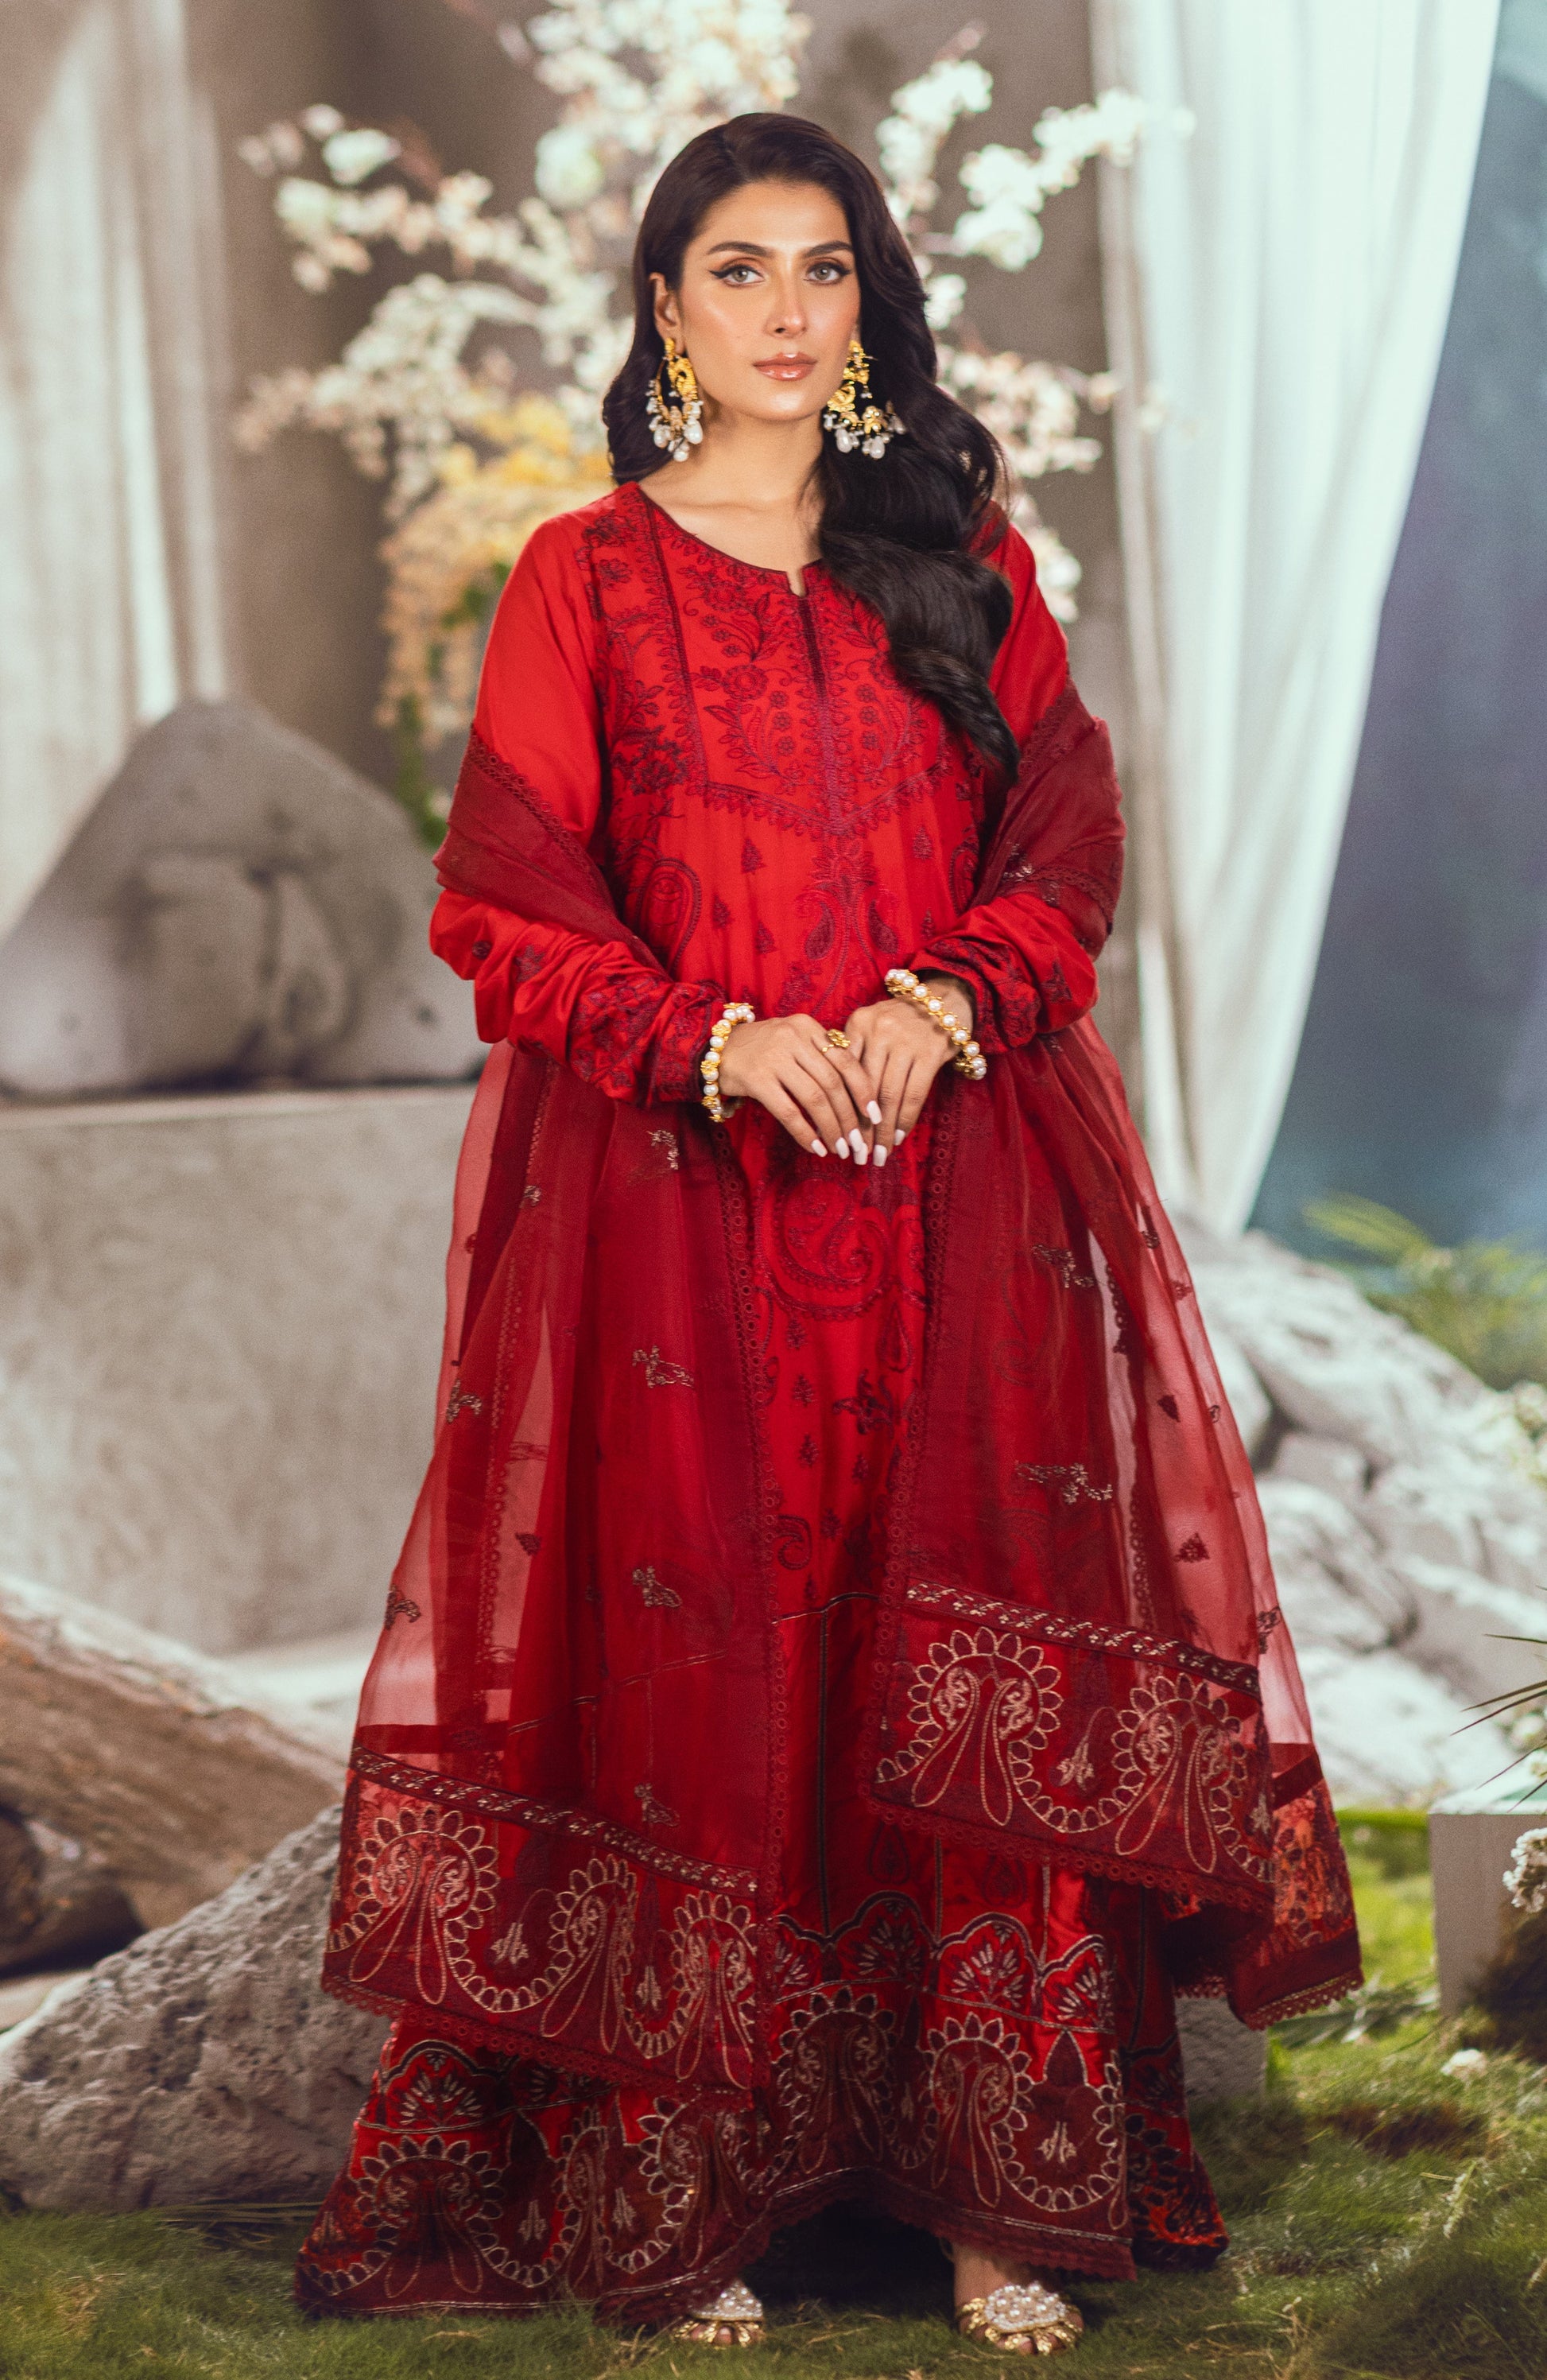 Buy Now, D#02 MAHIYMAAN - Eid Luxury Embroidered Lawn - Al Zohaib - Shahana Collection UK - Wedding and Bridal Party Dresses - Festive Eid 2023